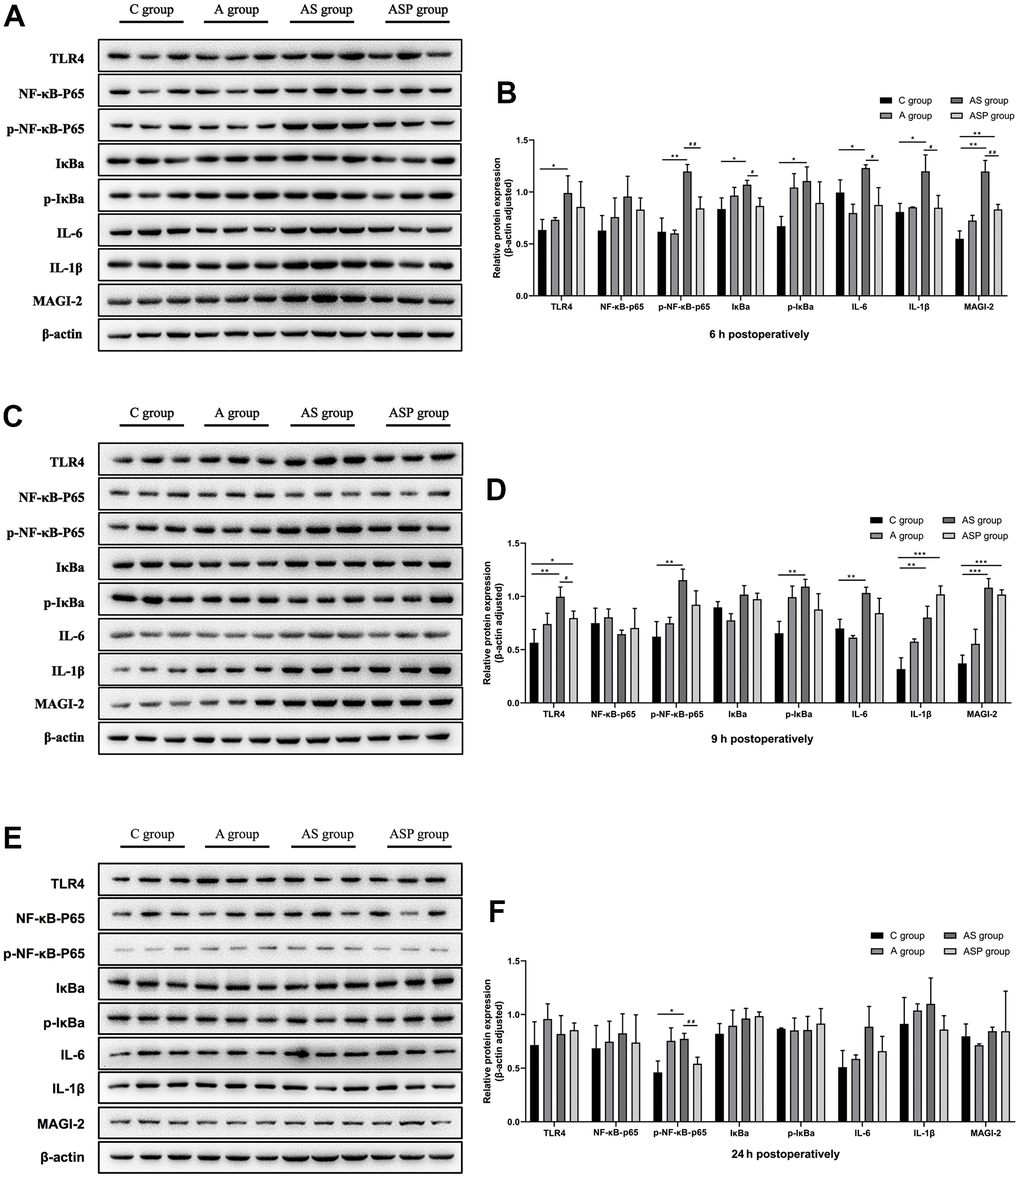 Expression of hippocampal proteins of POD model in aged mice. Six hour postoperatively (A, B) Compared with the C group, TLR4, p-NF-κB p65, IκBα, p-IκBα, IL-6, IL-1β, and MAGI-2 expression was elevated in the AS group. MAGI-2 expression was higher in the ASP group than in the C group. p-NF-κB p65, IκBα, IL-6, IL-1β and MAGI-2 expression was lower in the ASP group than in the AS group. Compared with the C group, *p**p***p#p##pC, D) Compared with the C group, the expression of TLR4, p-NF-κB p65, p-IκBα, IL-6, IL-1β, and MAGI-2 was elevated in the AS group, and the expression of TLR4, IL-1β and MAGI-2 in the ASP group was higher than that in the C group; compared with the AS group, the expression of TLR4 in the ASP group was decreased (Figure 8). Compared with the C group, *p**p***p#p##pE, F) Compared with the C group, p-NF-κB p65 expression was elevated in the AS group, and the p-NF-κB p65 expression was lower in the ASP group than in the AS group. Compared with the C group, *p**p***p#p##p